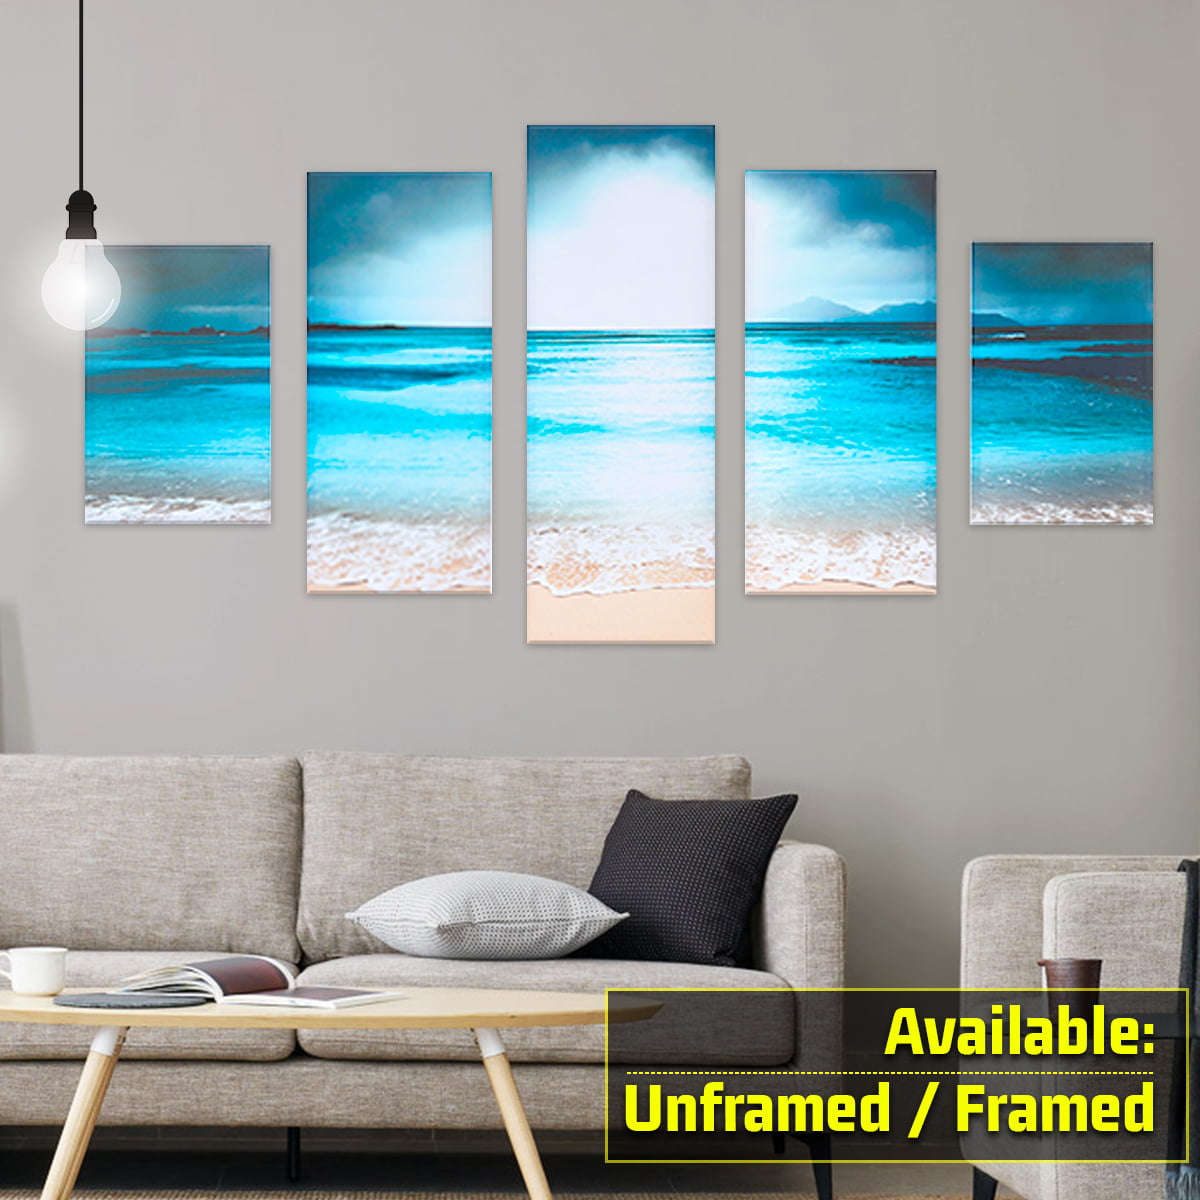 5 Panels Unframed Modern Canvas Art Oil Painting Picture Room Wall Hanging Decor